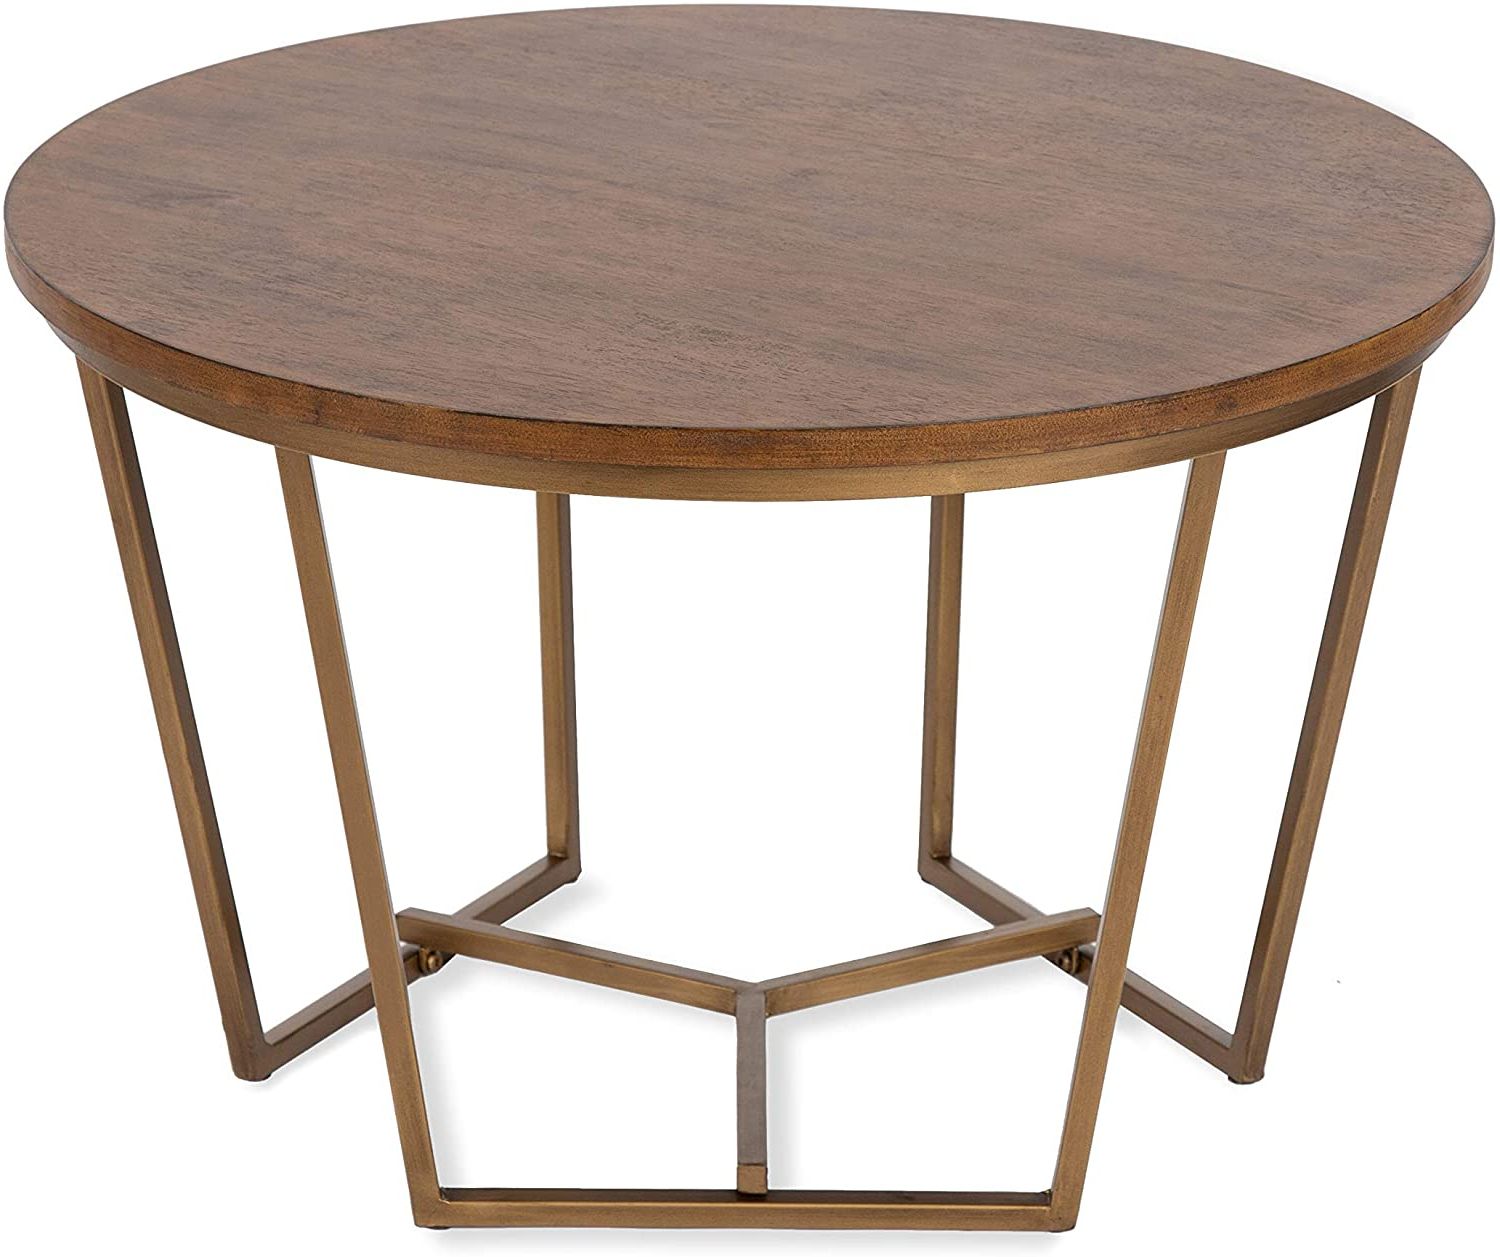 2019 Walnut Wood And Gold Metal Coffee Tables Pertaining To Amazon: Kate And Laurel Solvay Mid Century Coffee Table, 28 X 28 X (View 7 of 10)